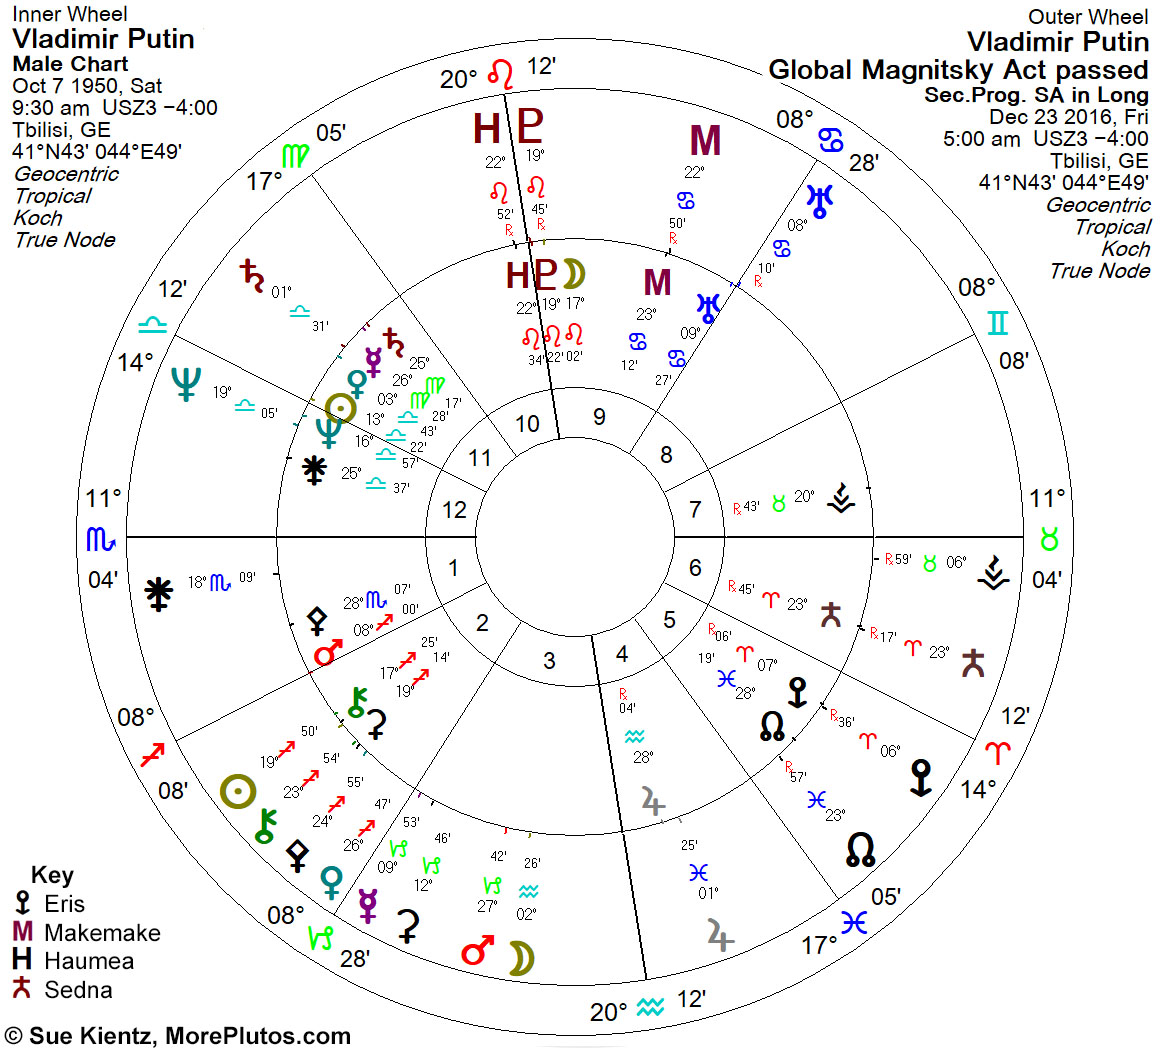 Biwheel chart showing Vladimir Putin natal (inner) with his secondary progression to Global Magnitsky Act and Trump election (outer)